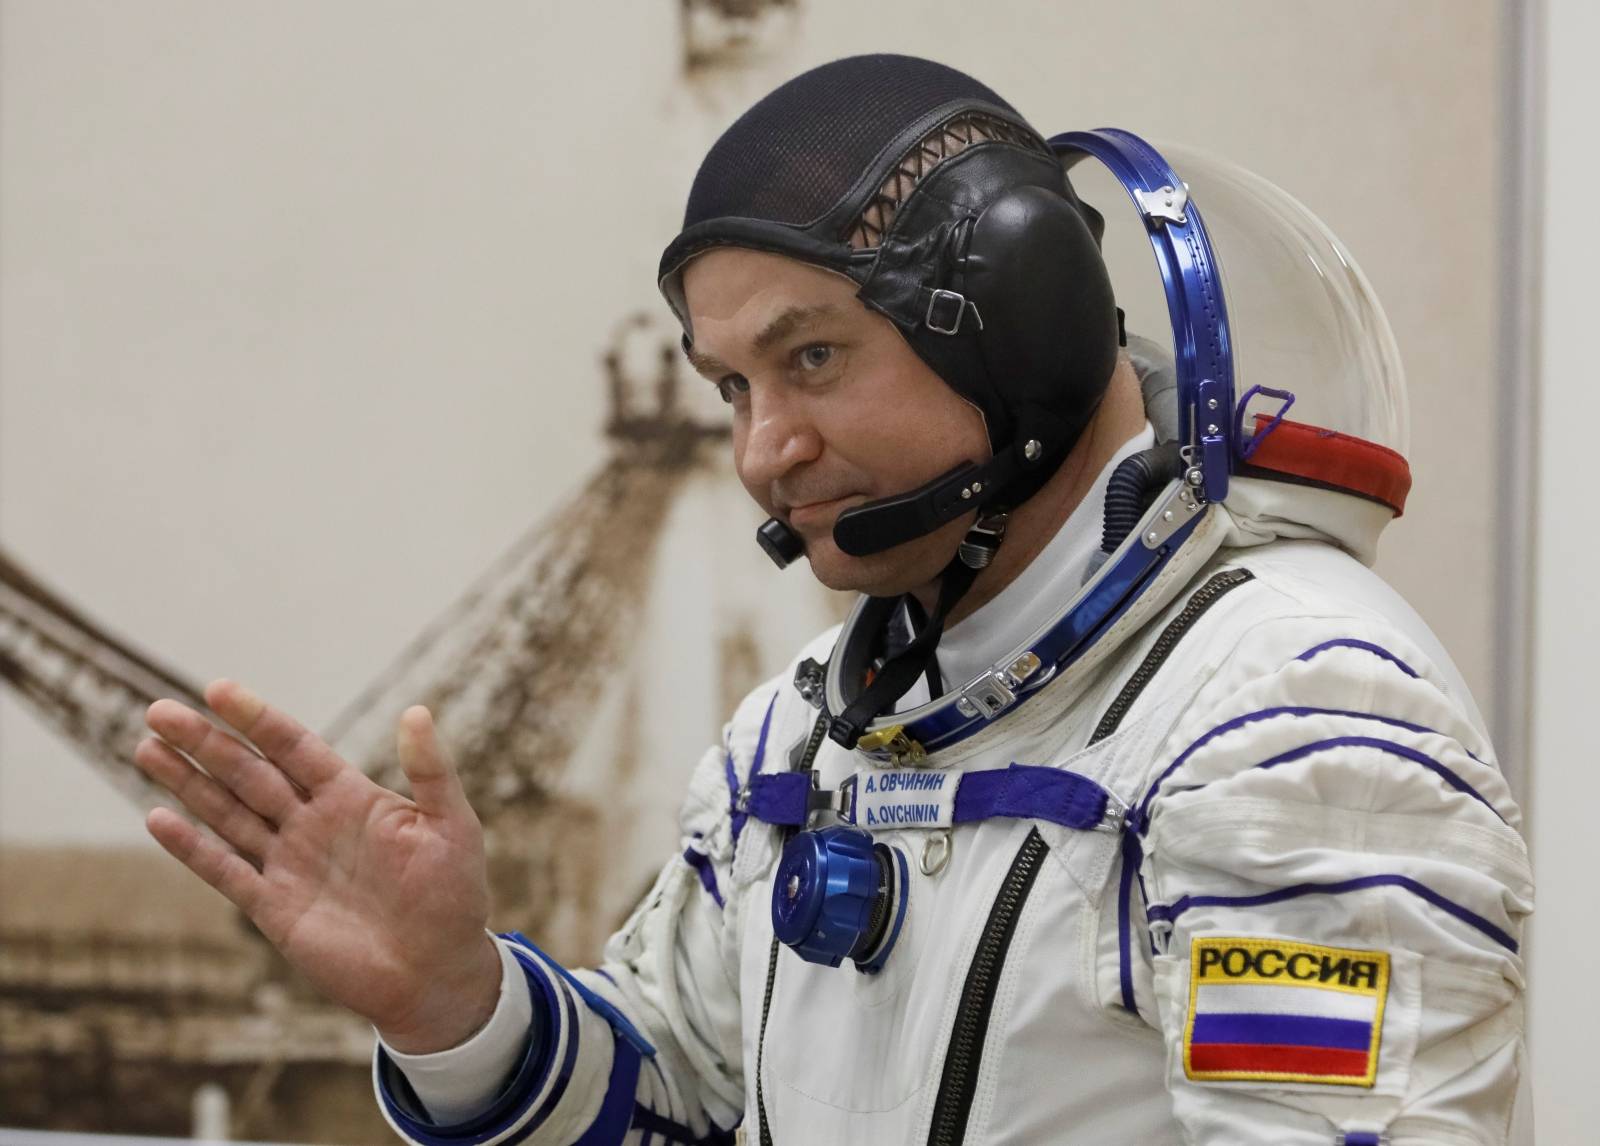 The International Space Station (ISS) crew member Aleksey Ovchinin of Russia waves before his space suit check at the Baikonur Cosmodrome